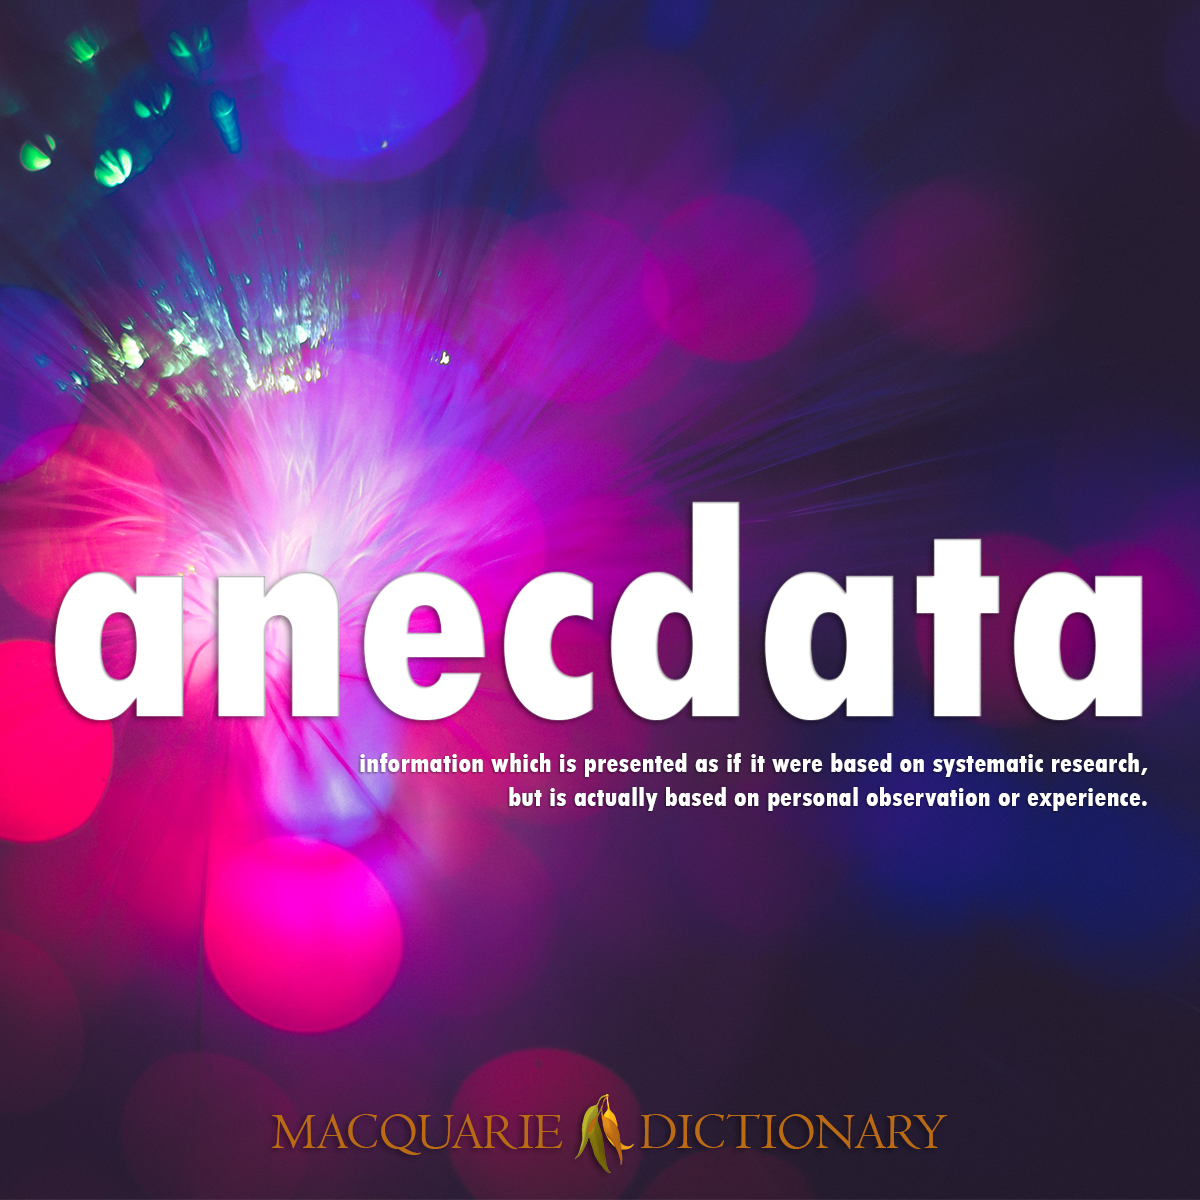 Image of Macquarie Dictionary Word of the Year - anecdata - information which is presented as if it were based on systematic research, but is actually based on personal observation or experience.